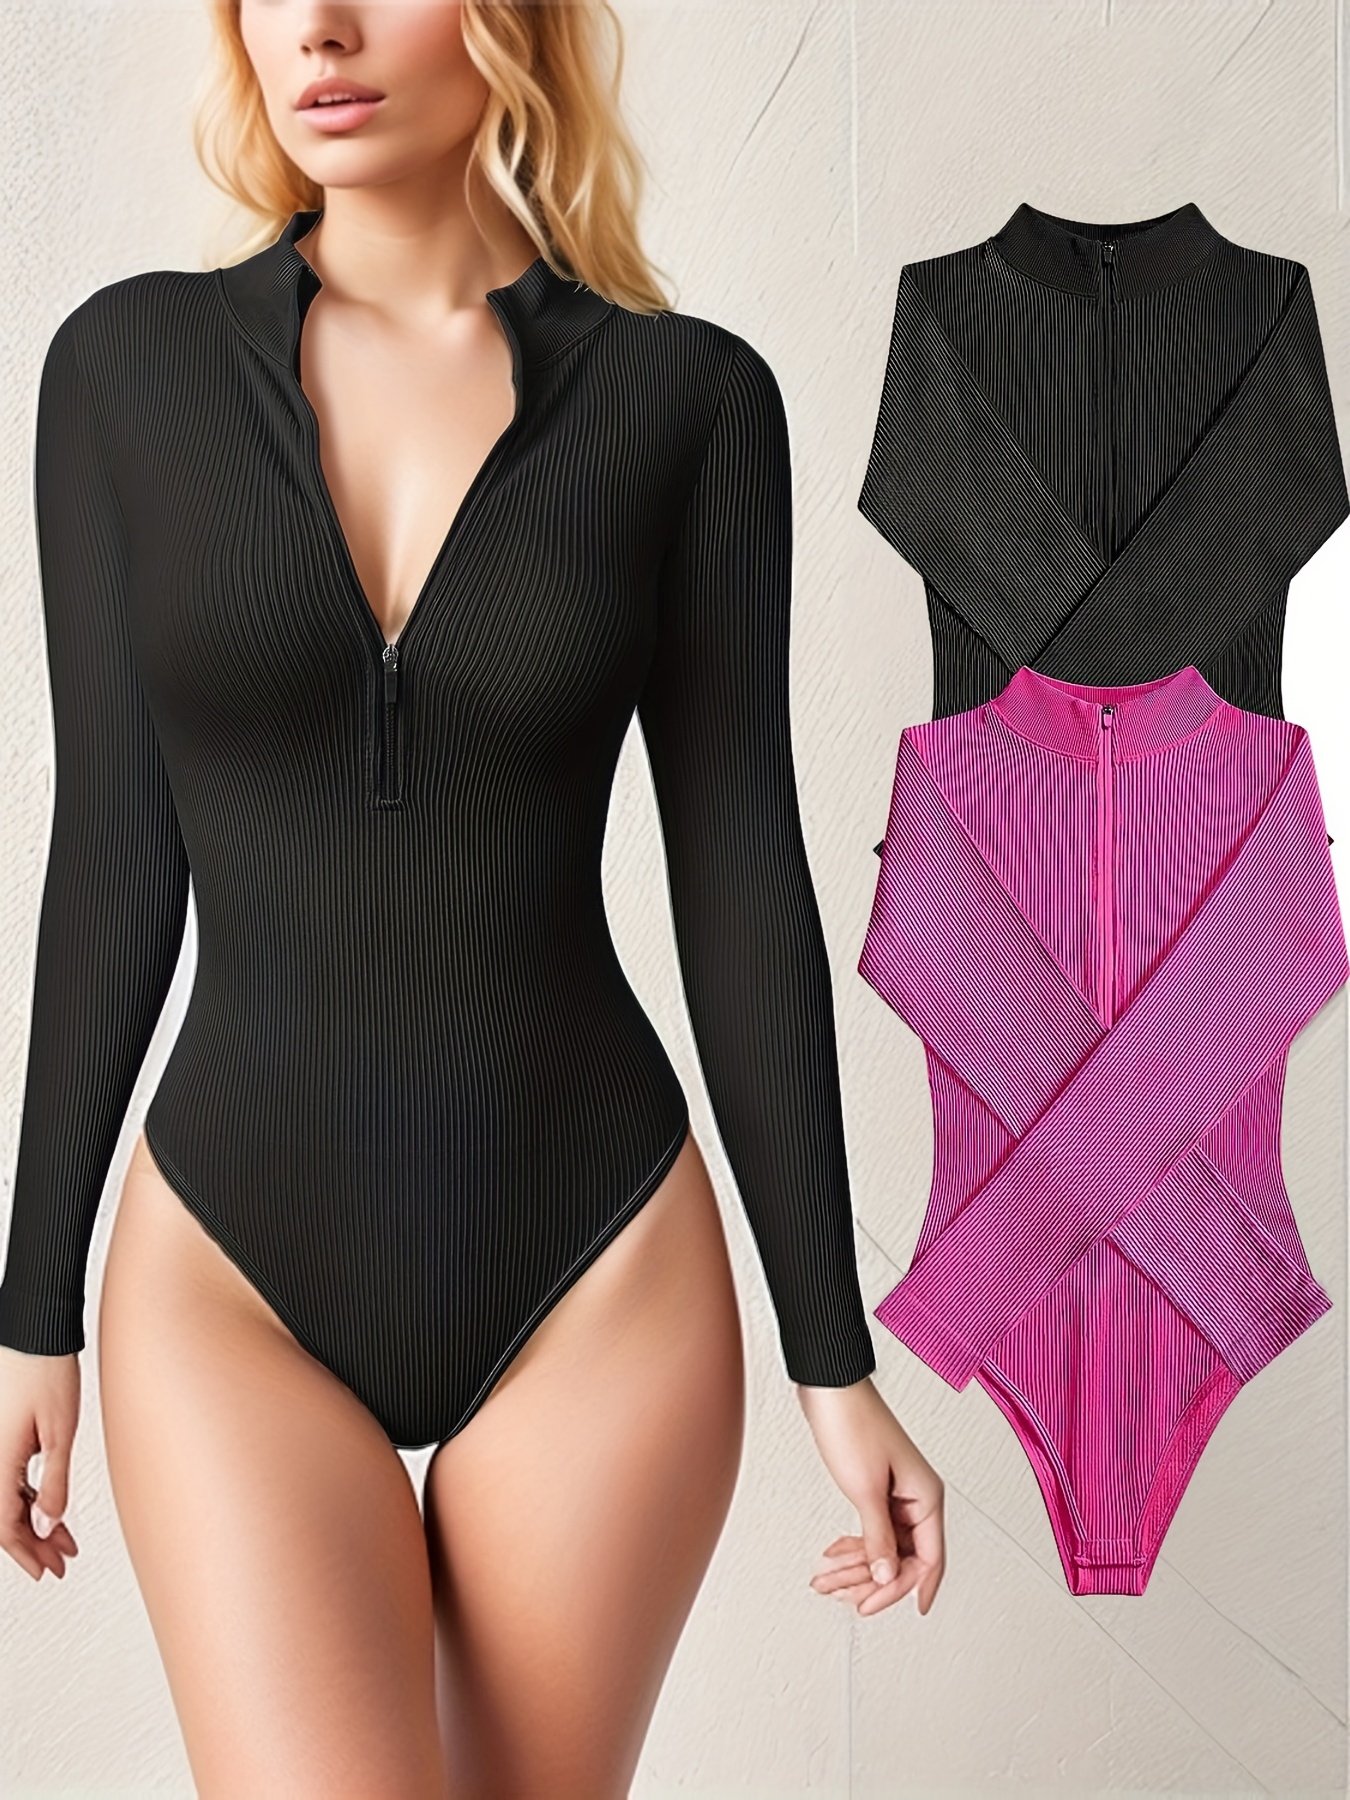 6 Colors Workout Women Sexy Outfits Long Sleeve Zipper Rompers Tight  Bodysuit Sexy Jumpsuit Short Pants for Yoga